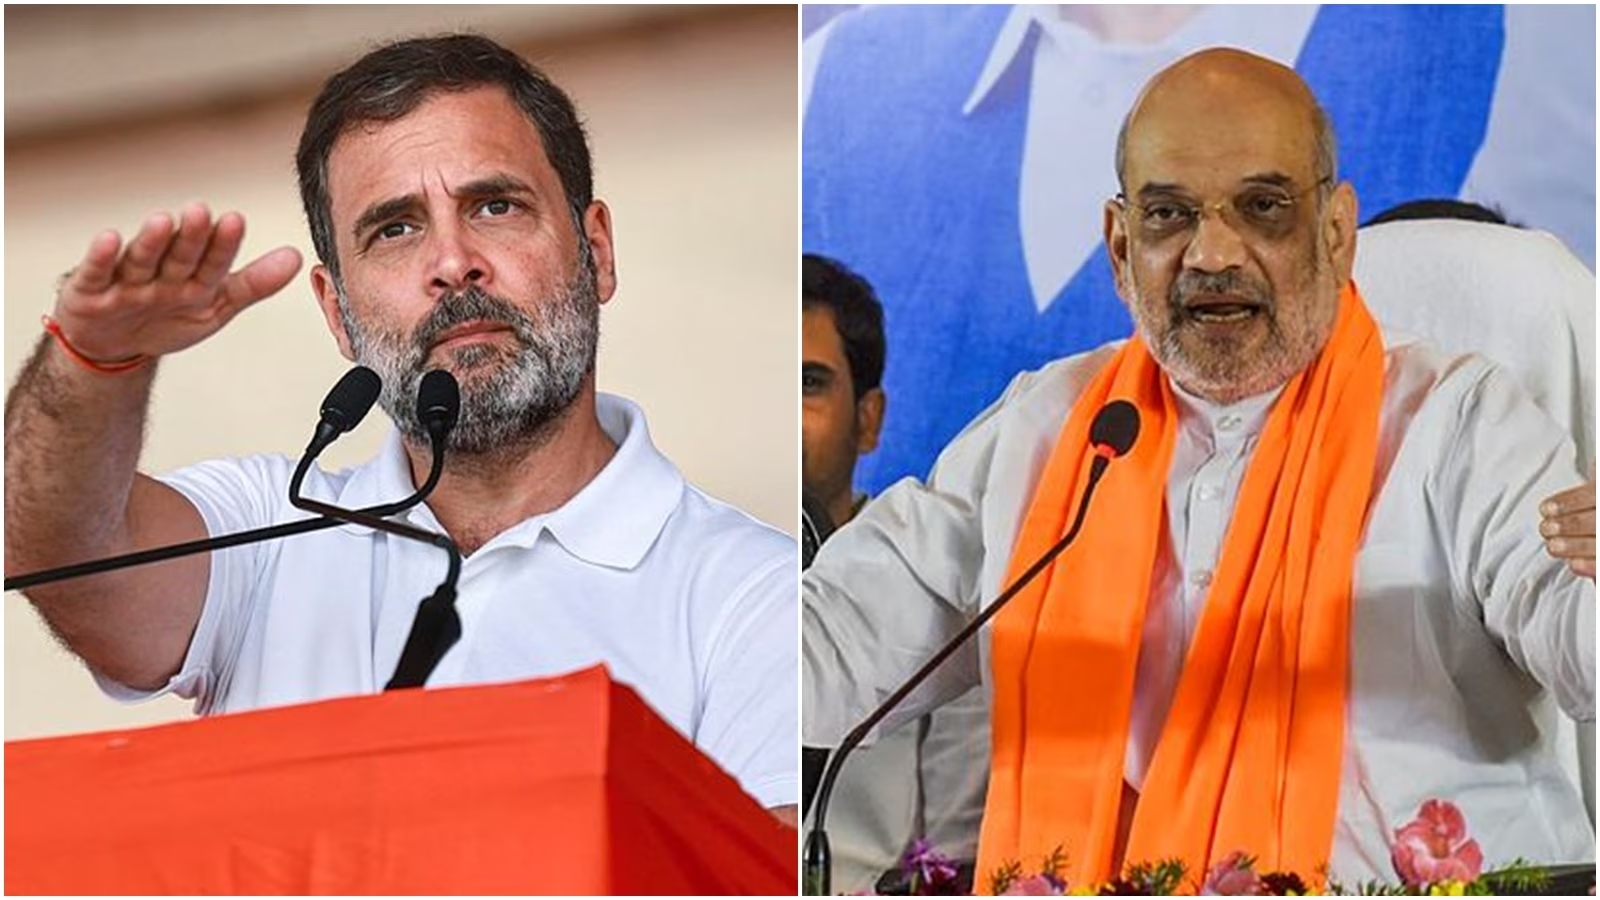 Rahul Gandhi Summonsed by UP Court Over 2018 Controversial Remarks on Amit Shah